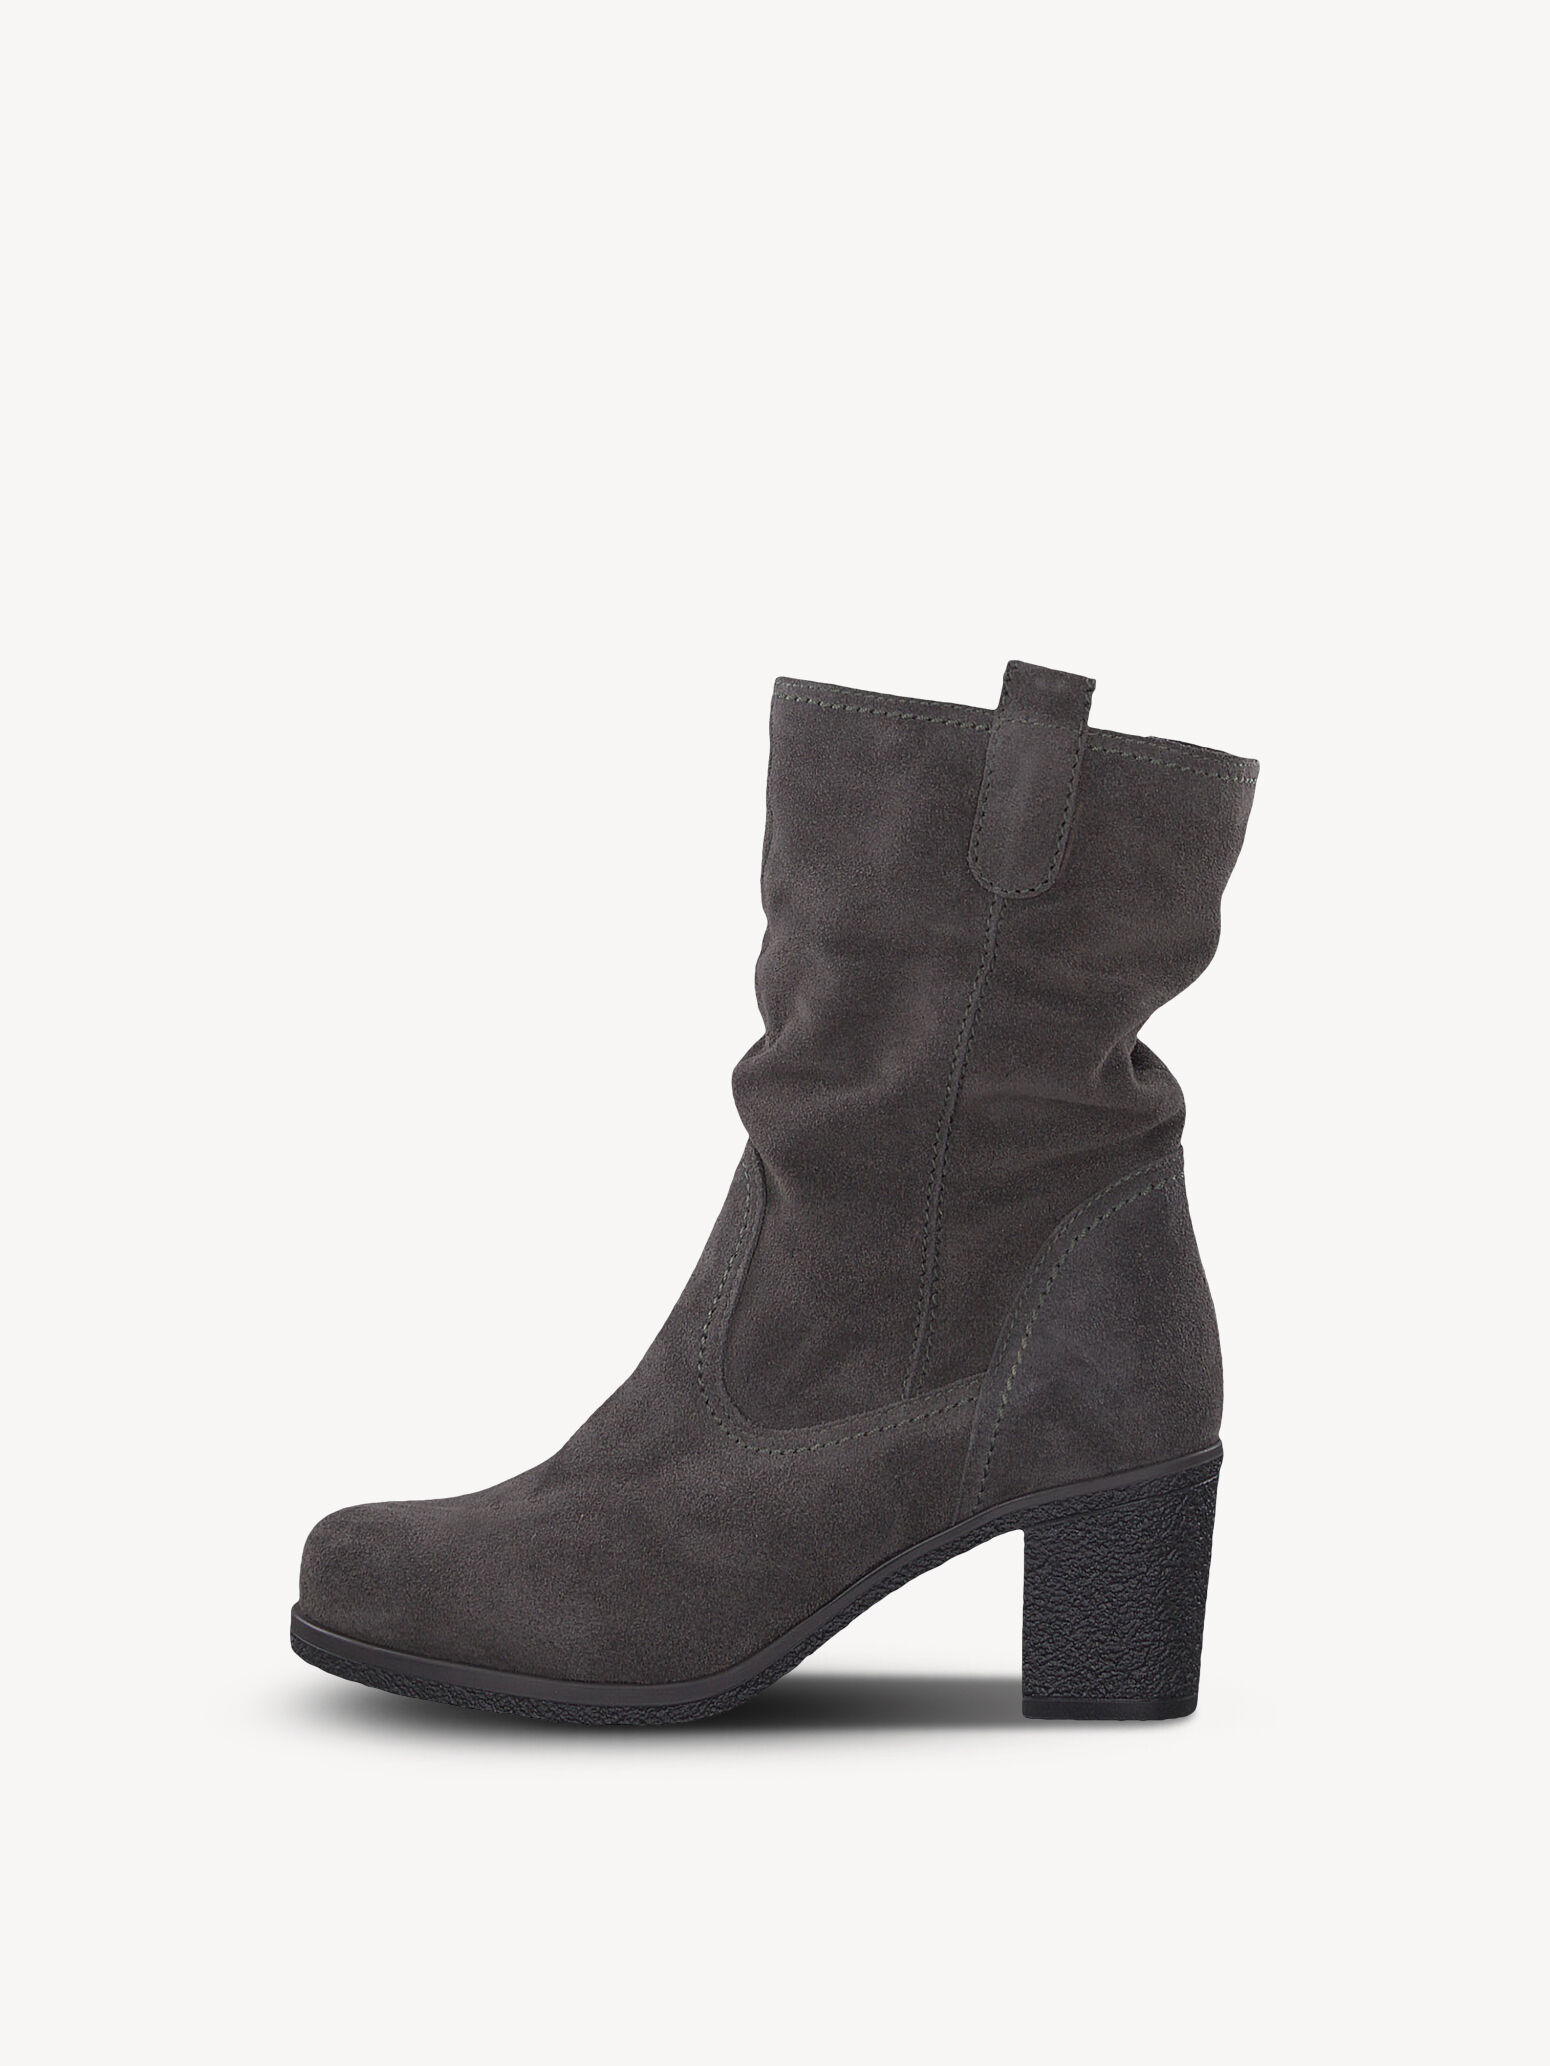 Leather Bootie - grey 1-1-26083-23-214 